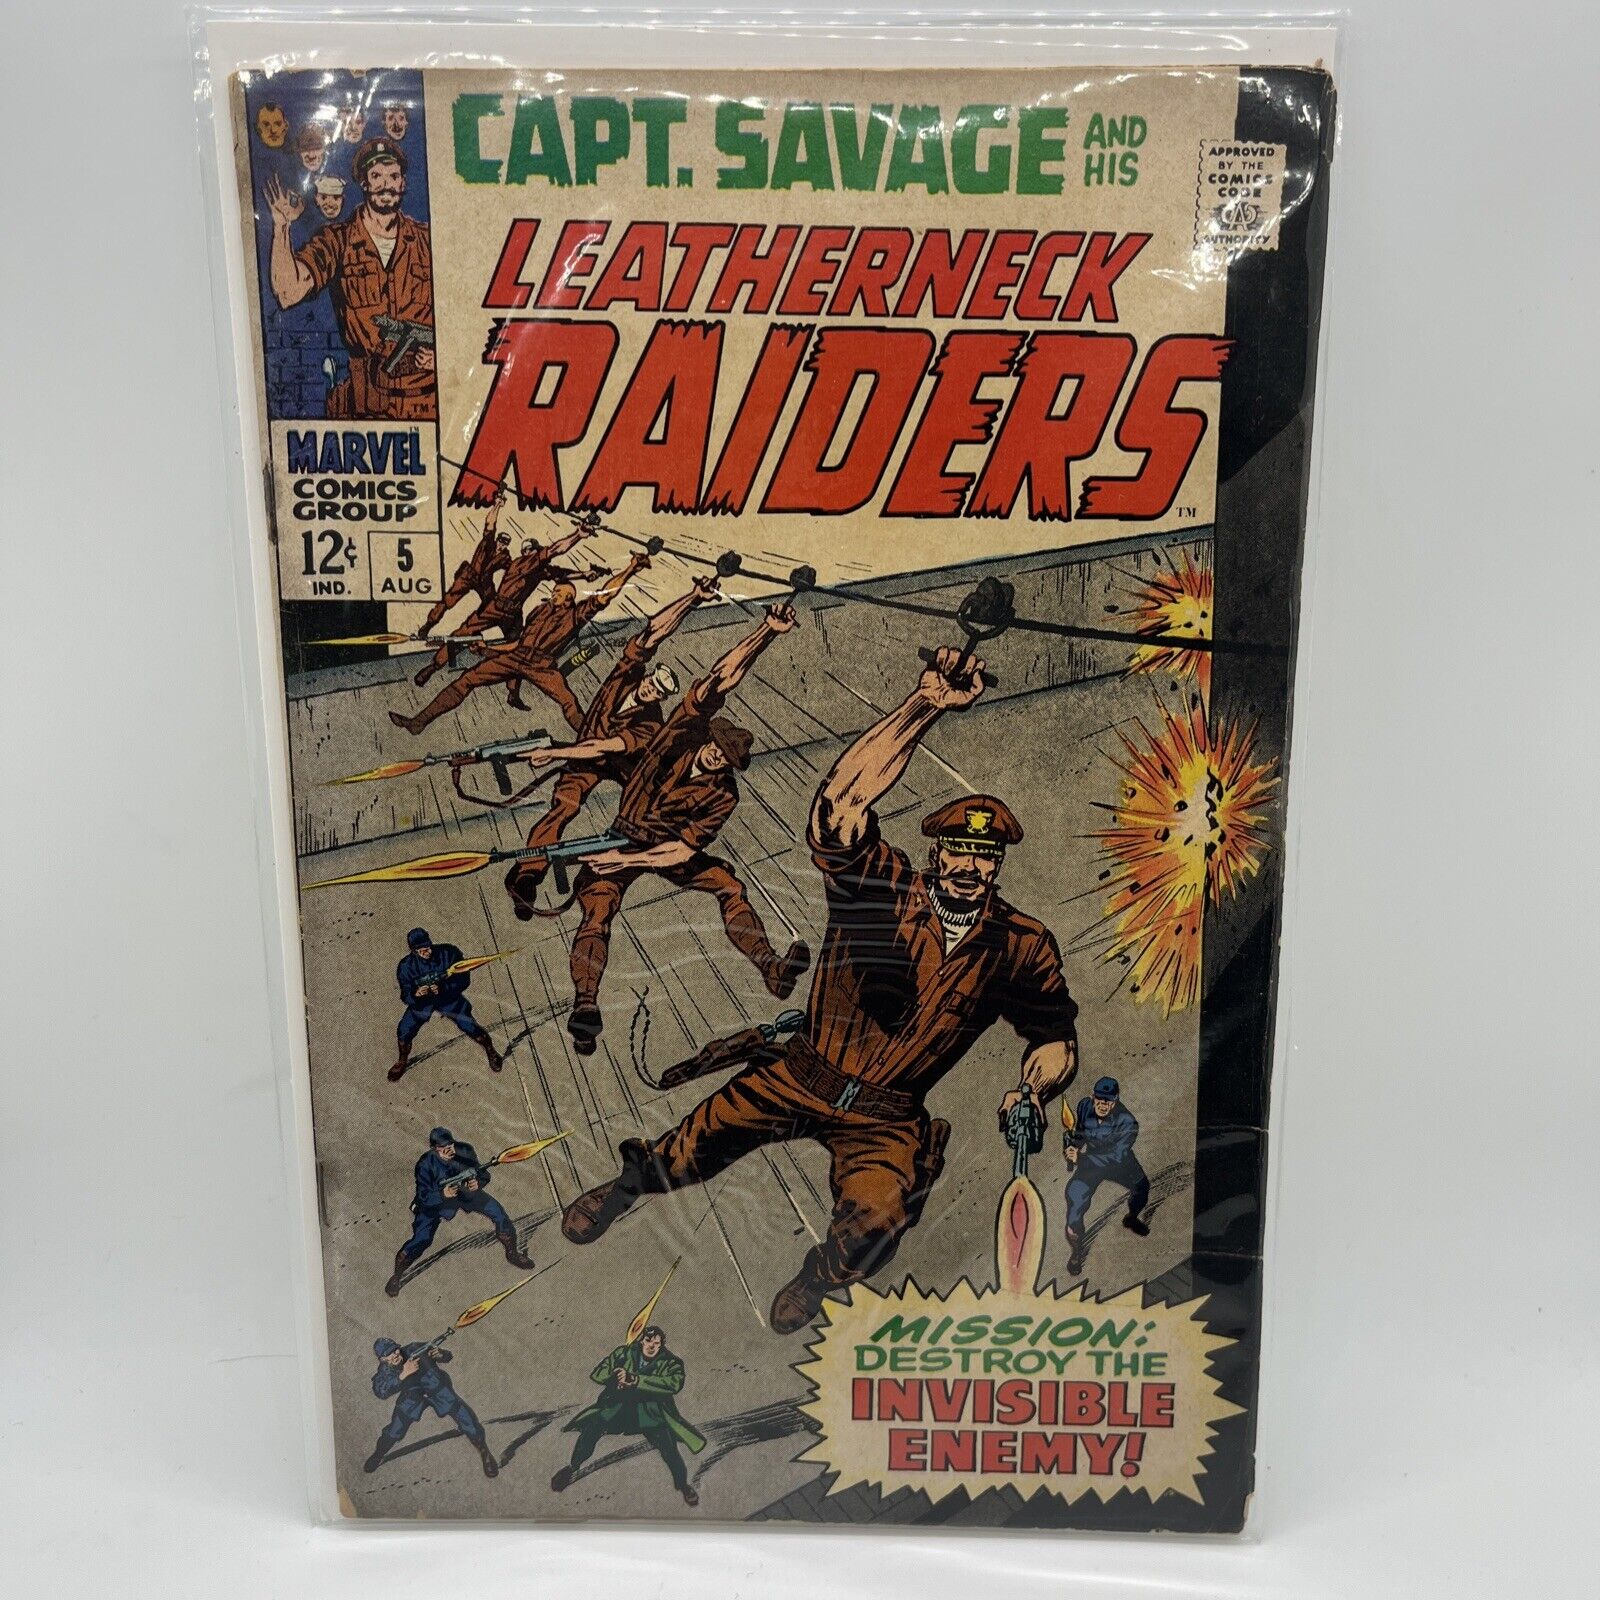 Captain Savage and His Leatherneck Raiders #5